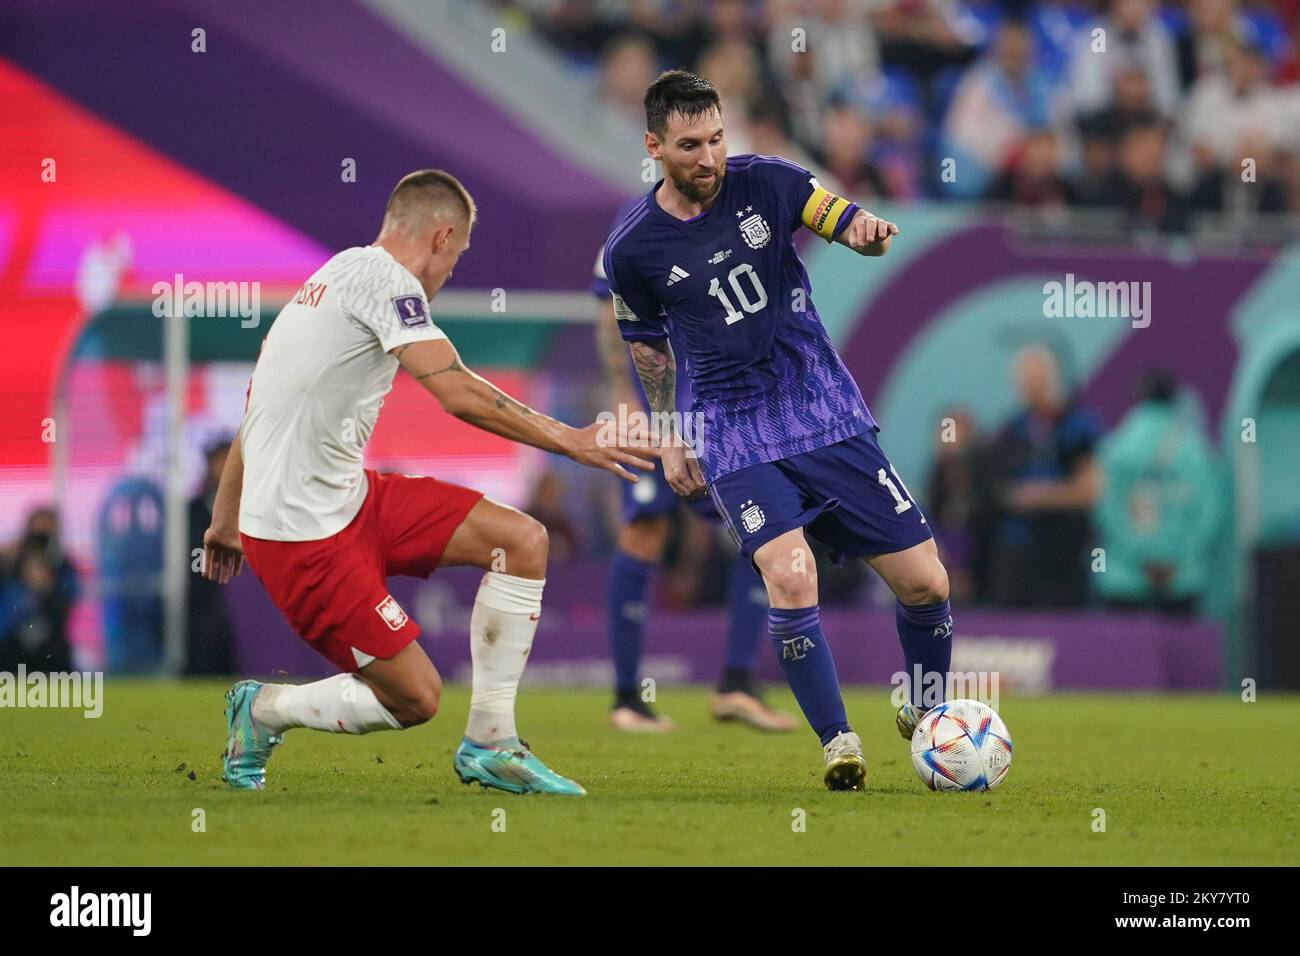 DOHA, QATAR - NOVEMBER 30: Player of Argentina Lionel Messi during the FIFA World Cup Qatar 2022 group C match between Argentina and Poland at Stadium 974 on November 30, 2022 in Doha, Qatar. (Photo by Florencia Tan Jun/PxImages) Credit: Px Images/Alamy Live News Stock Photo